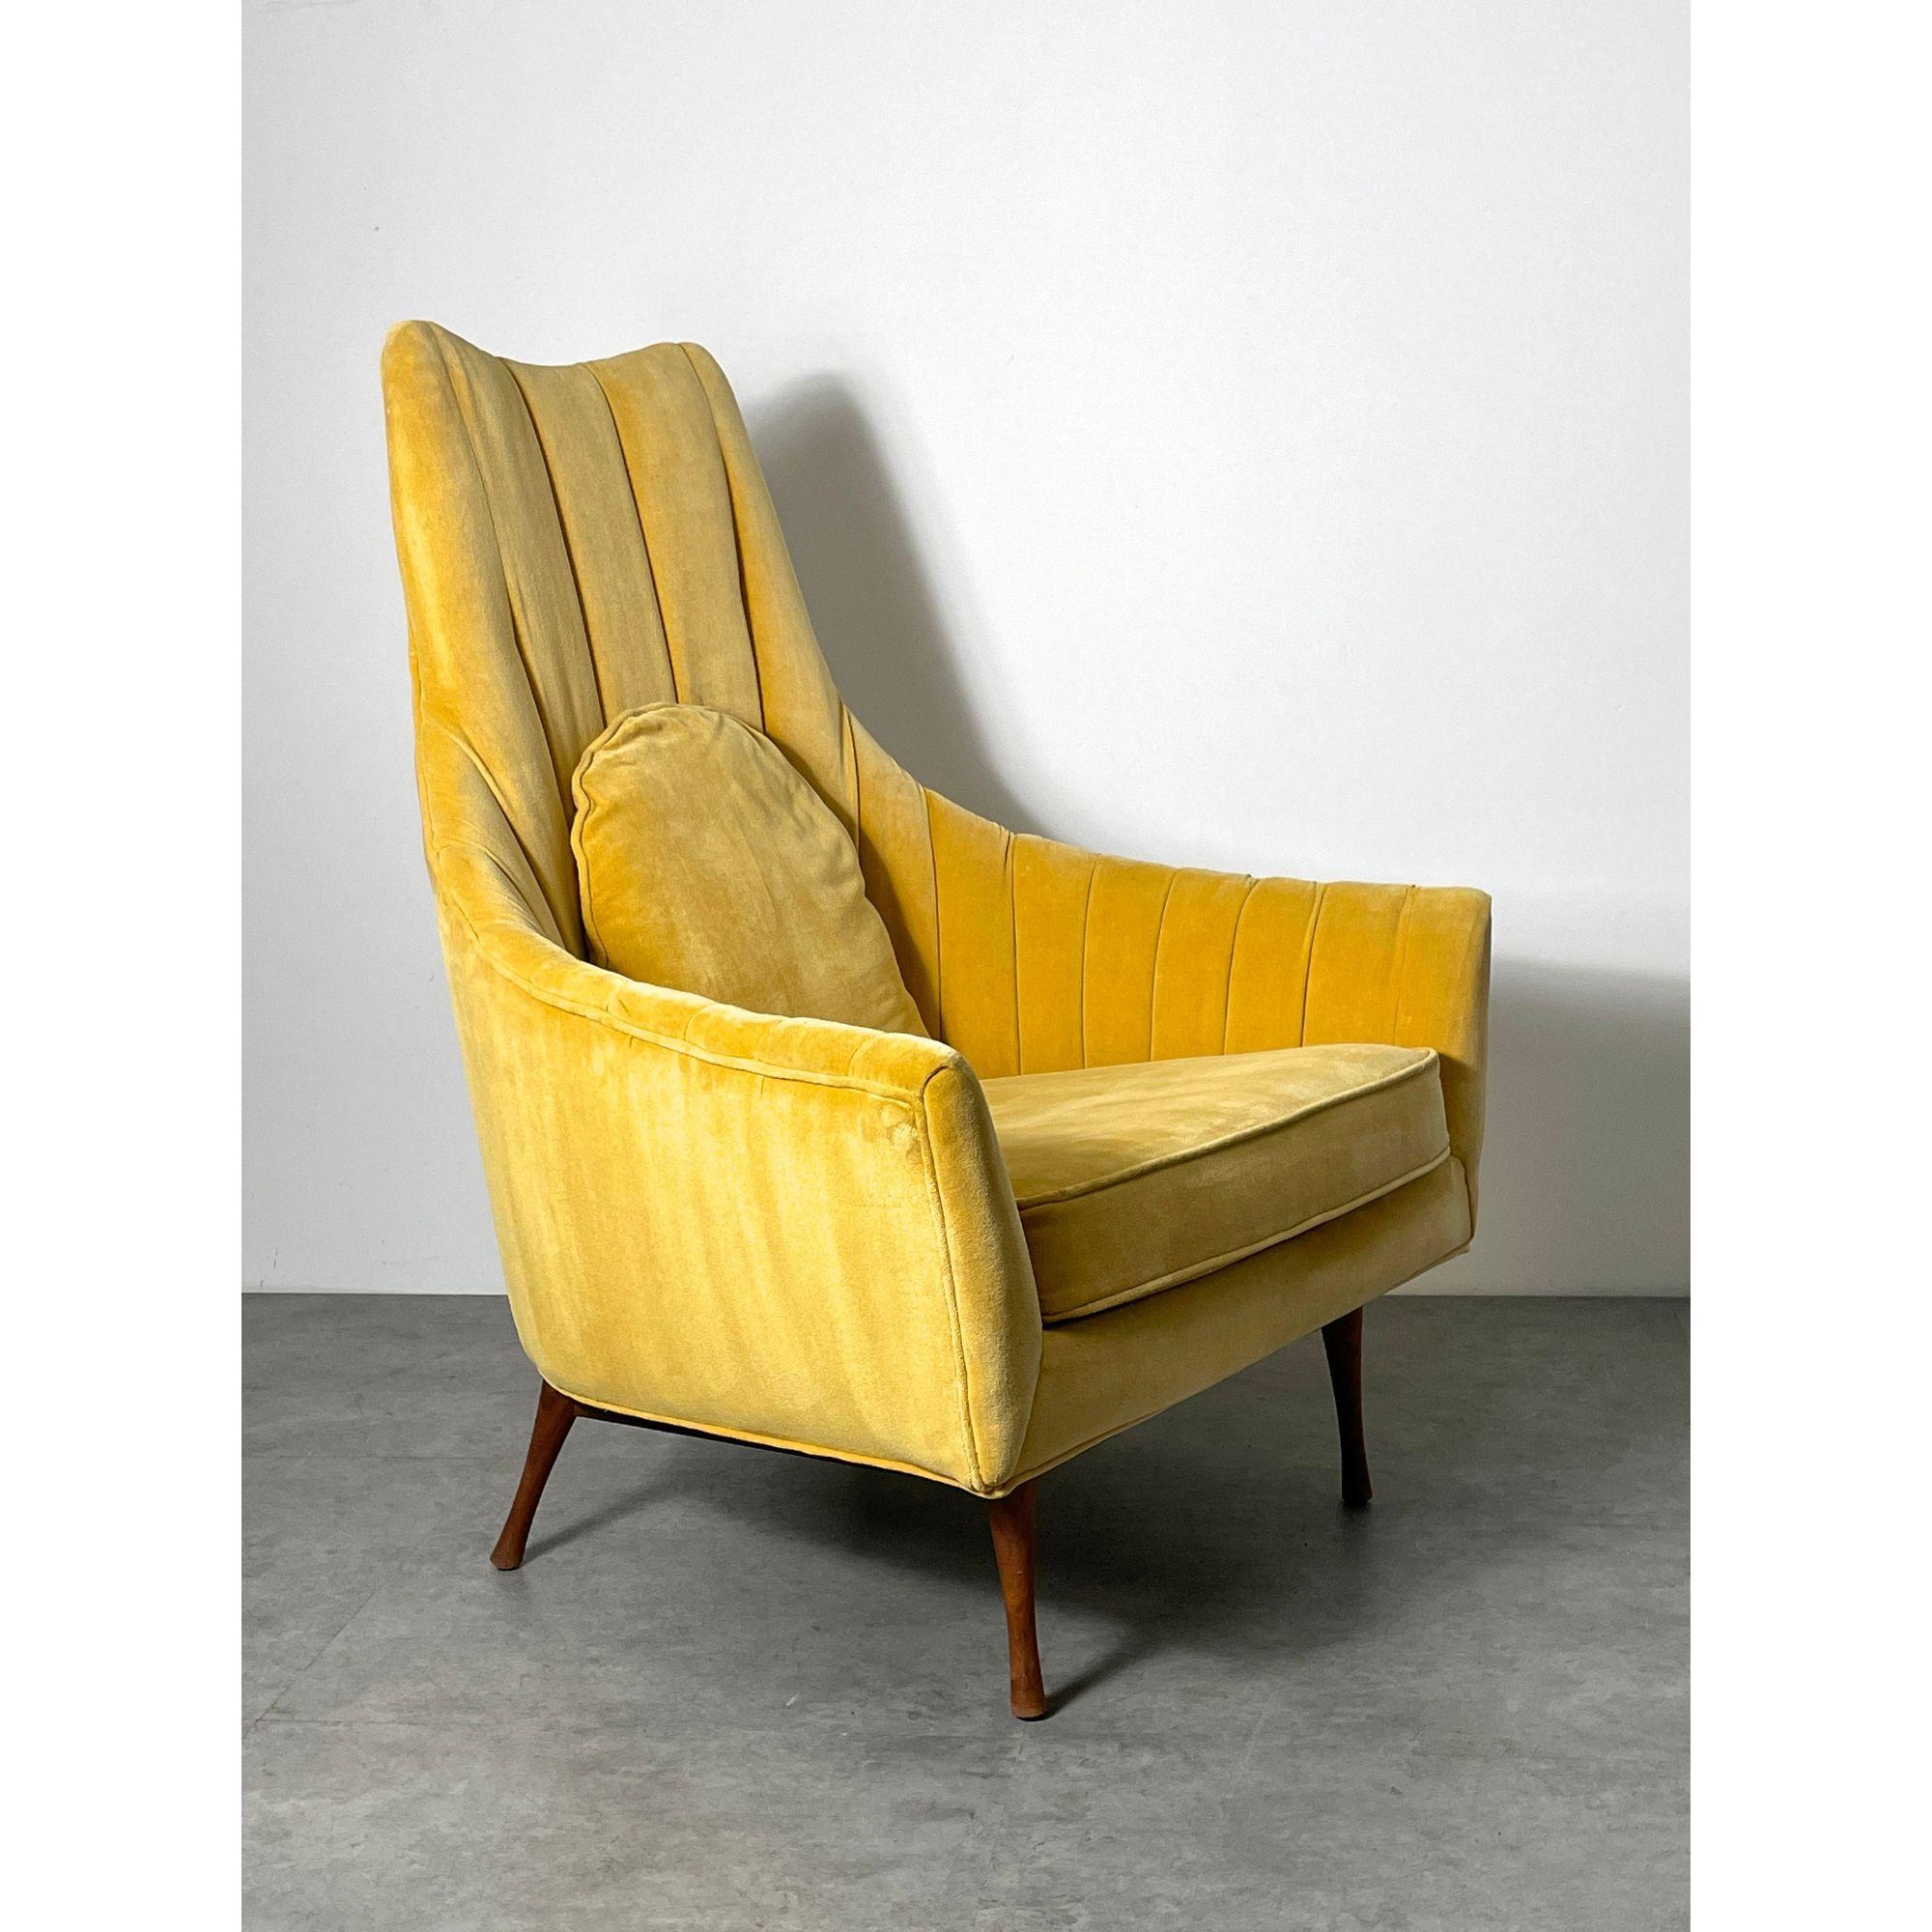 Mid-Century Modern Vintage Yellow Symmetric Group Lounge Chair by Paul McCobb for Widdicomb 1960s